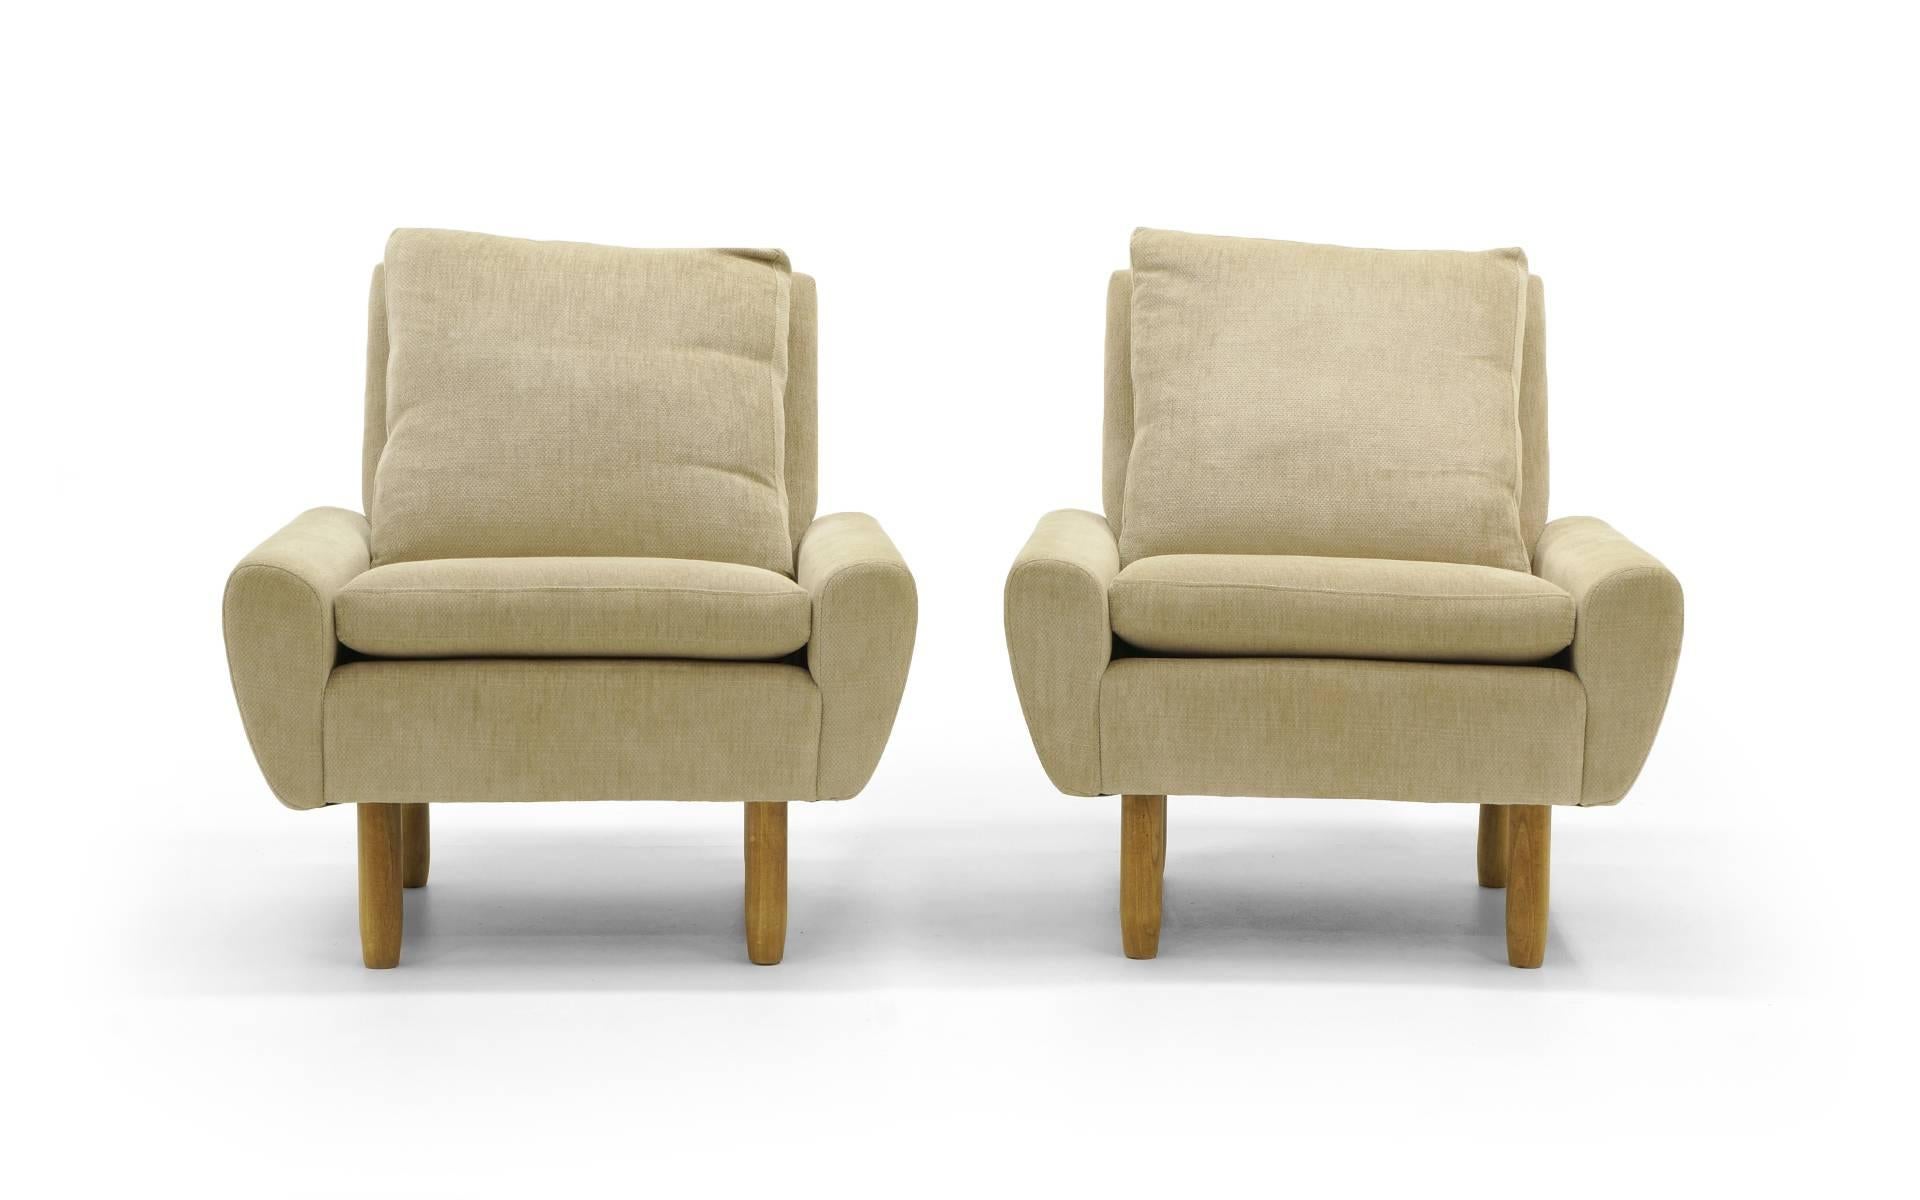 Pair of fully upholstered Danish modern lounge chairs in a neutral cream fabric. Very comfortable.